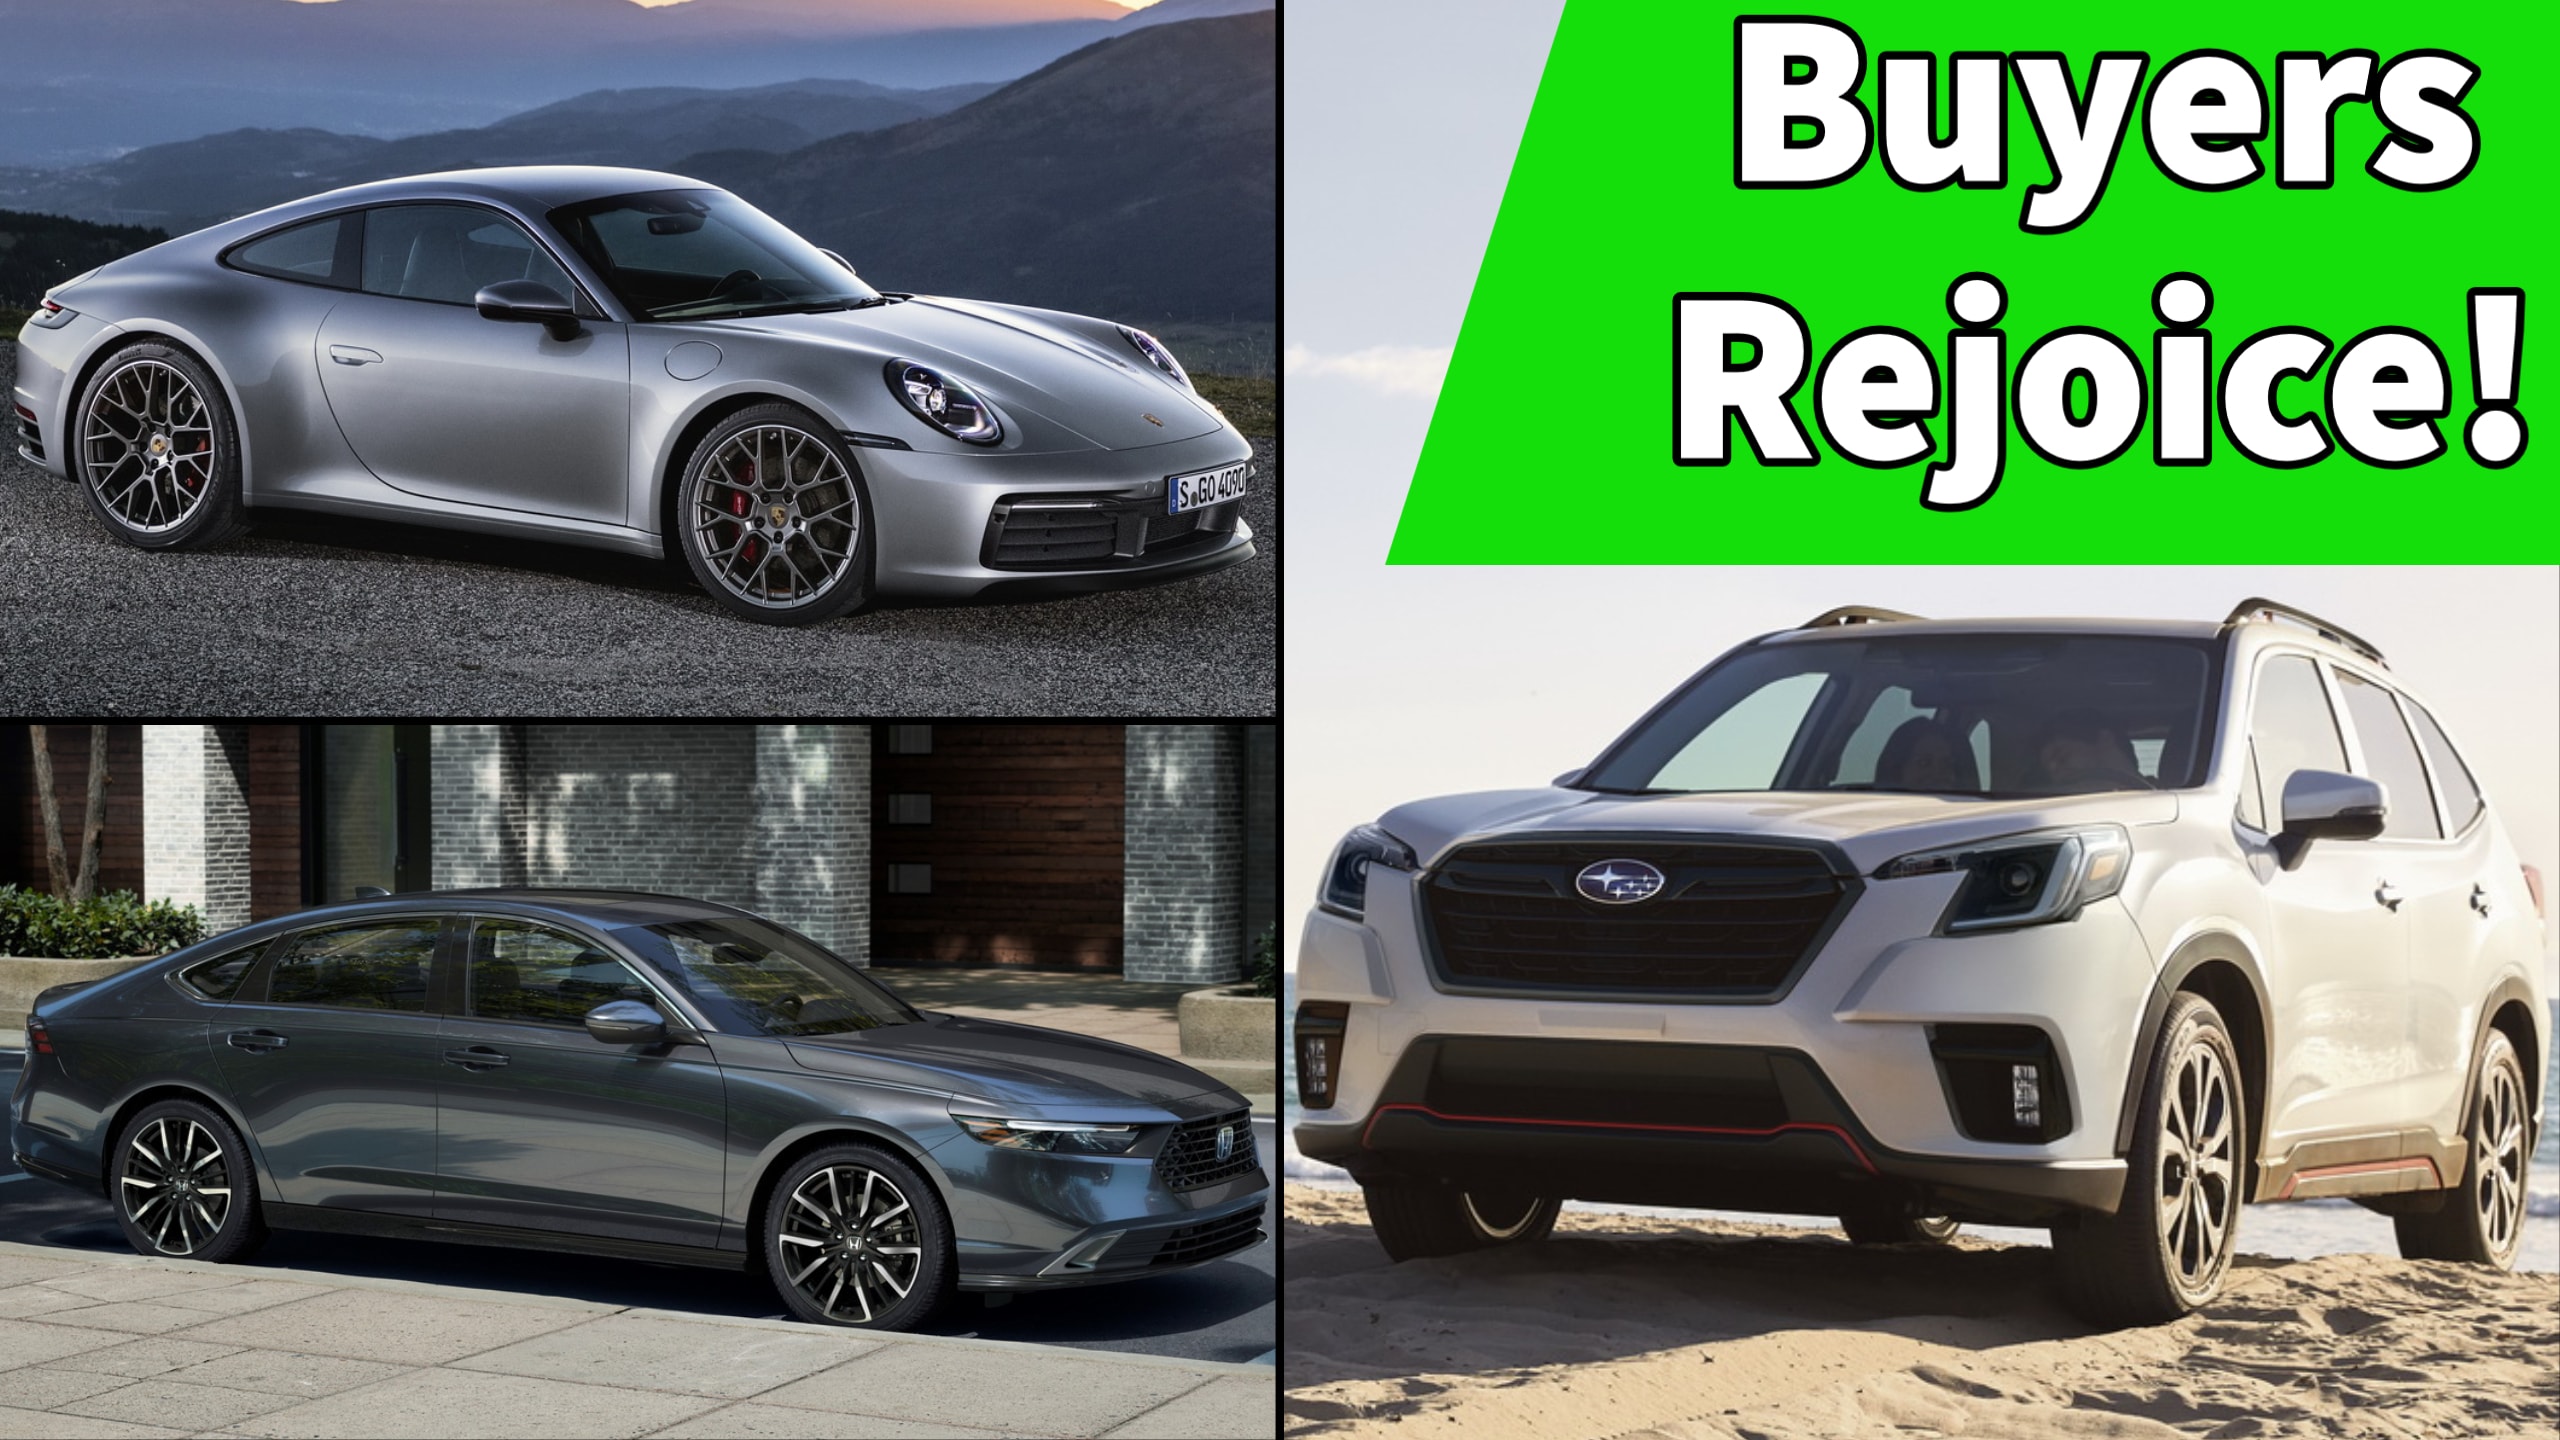 Top 10 Cars With THE BEST Resale Value That Save You Money